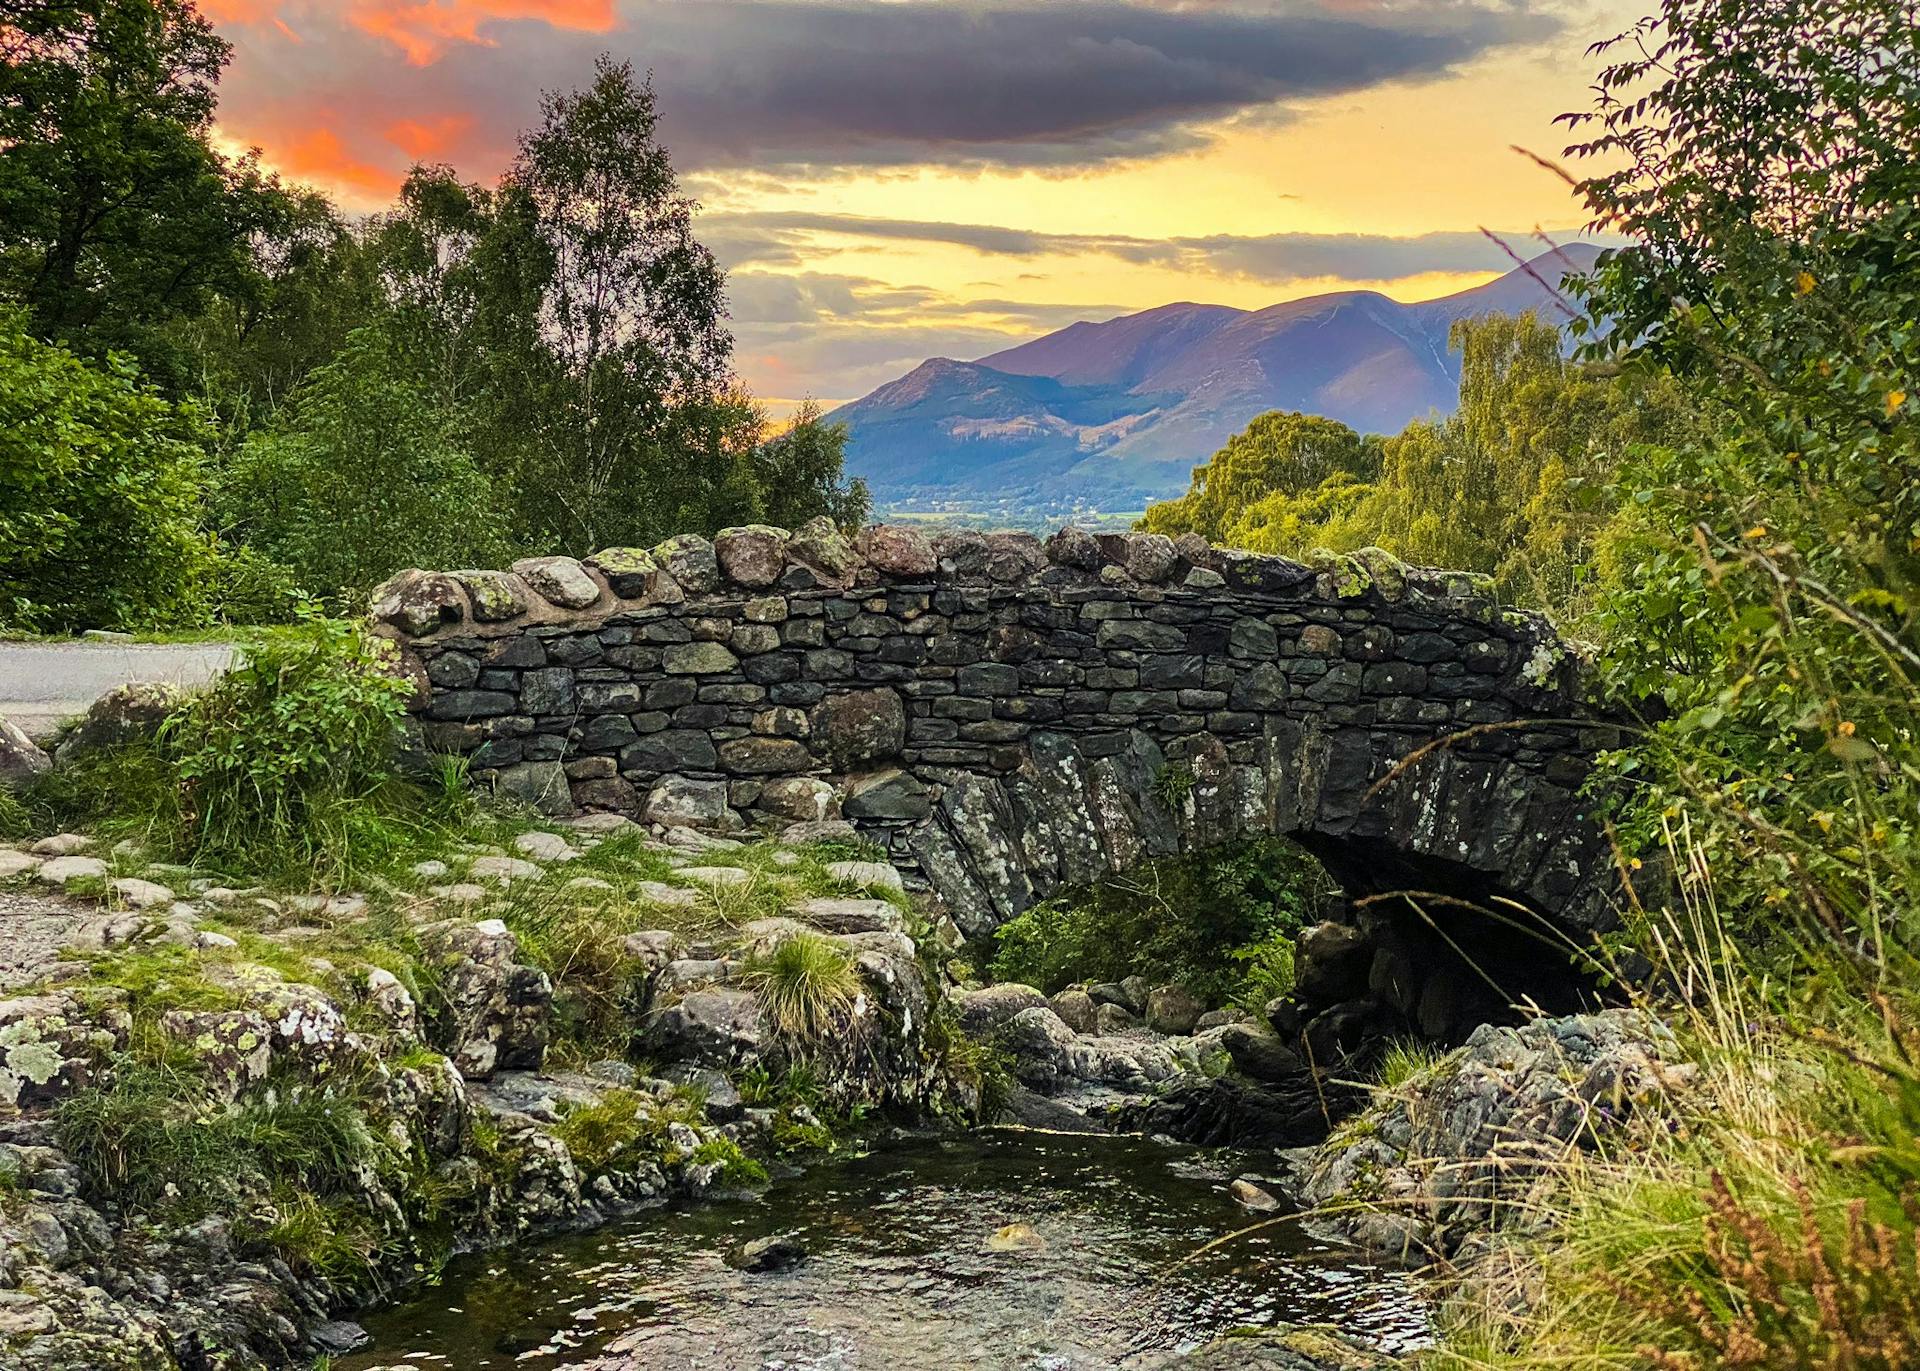 <p>Ashness Bridge is a traditional stone-built bridge on a single-track road in the English Lake District, Cumbria. It is a popular spot for photographers and visitors, as it offers a stunning view of the Borrowdale valley, Derwentwater lake, and Skiddaw mountain. </p><p><br></p><p>The bridge dates back to the 17th or 18th century, and was used by packhorses carrying goods from the hamlet of Watendlath to the town of Keswick. The bridge is owned by the National Trust, and there is a small car park nearby. You can also reach the bridge by taking the Keswick Launch to Ashness Gate, or by taking the bus to Derwentwater Youth Hostel. </p><p><br></p><p>Near the bridge, there is a surprise view point that gives you a panoramic vista of the lake and the town. Ashness Bridge is a beautiful and historic place to visit in the Lake District.</p>